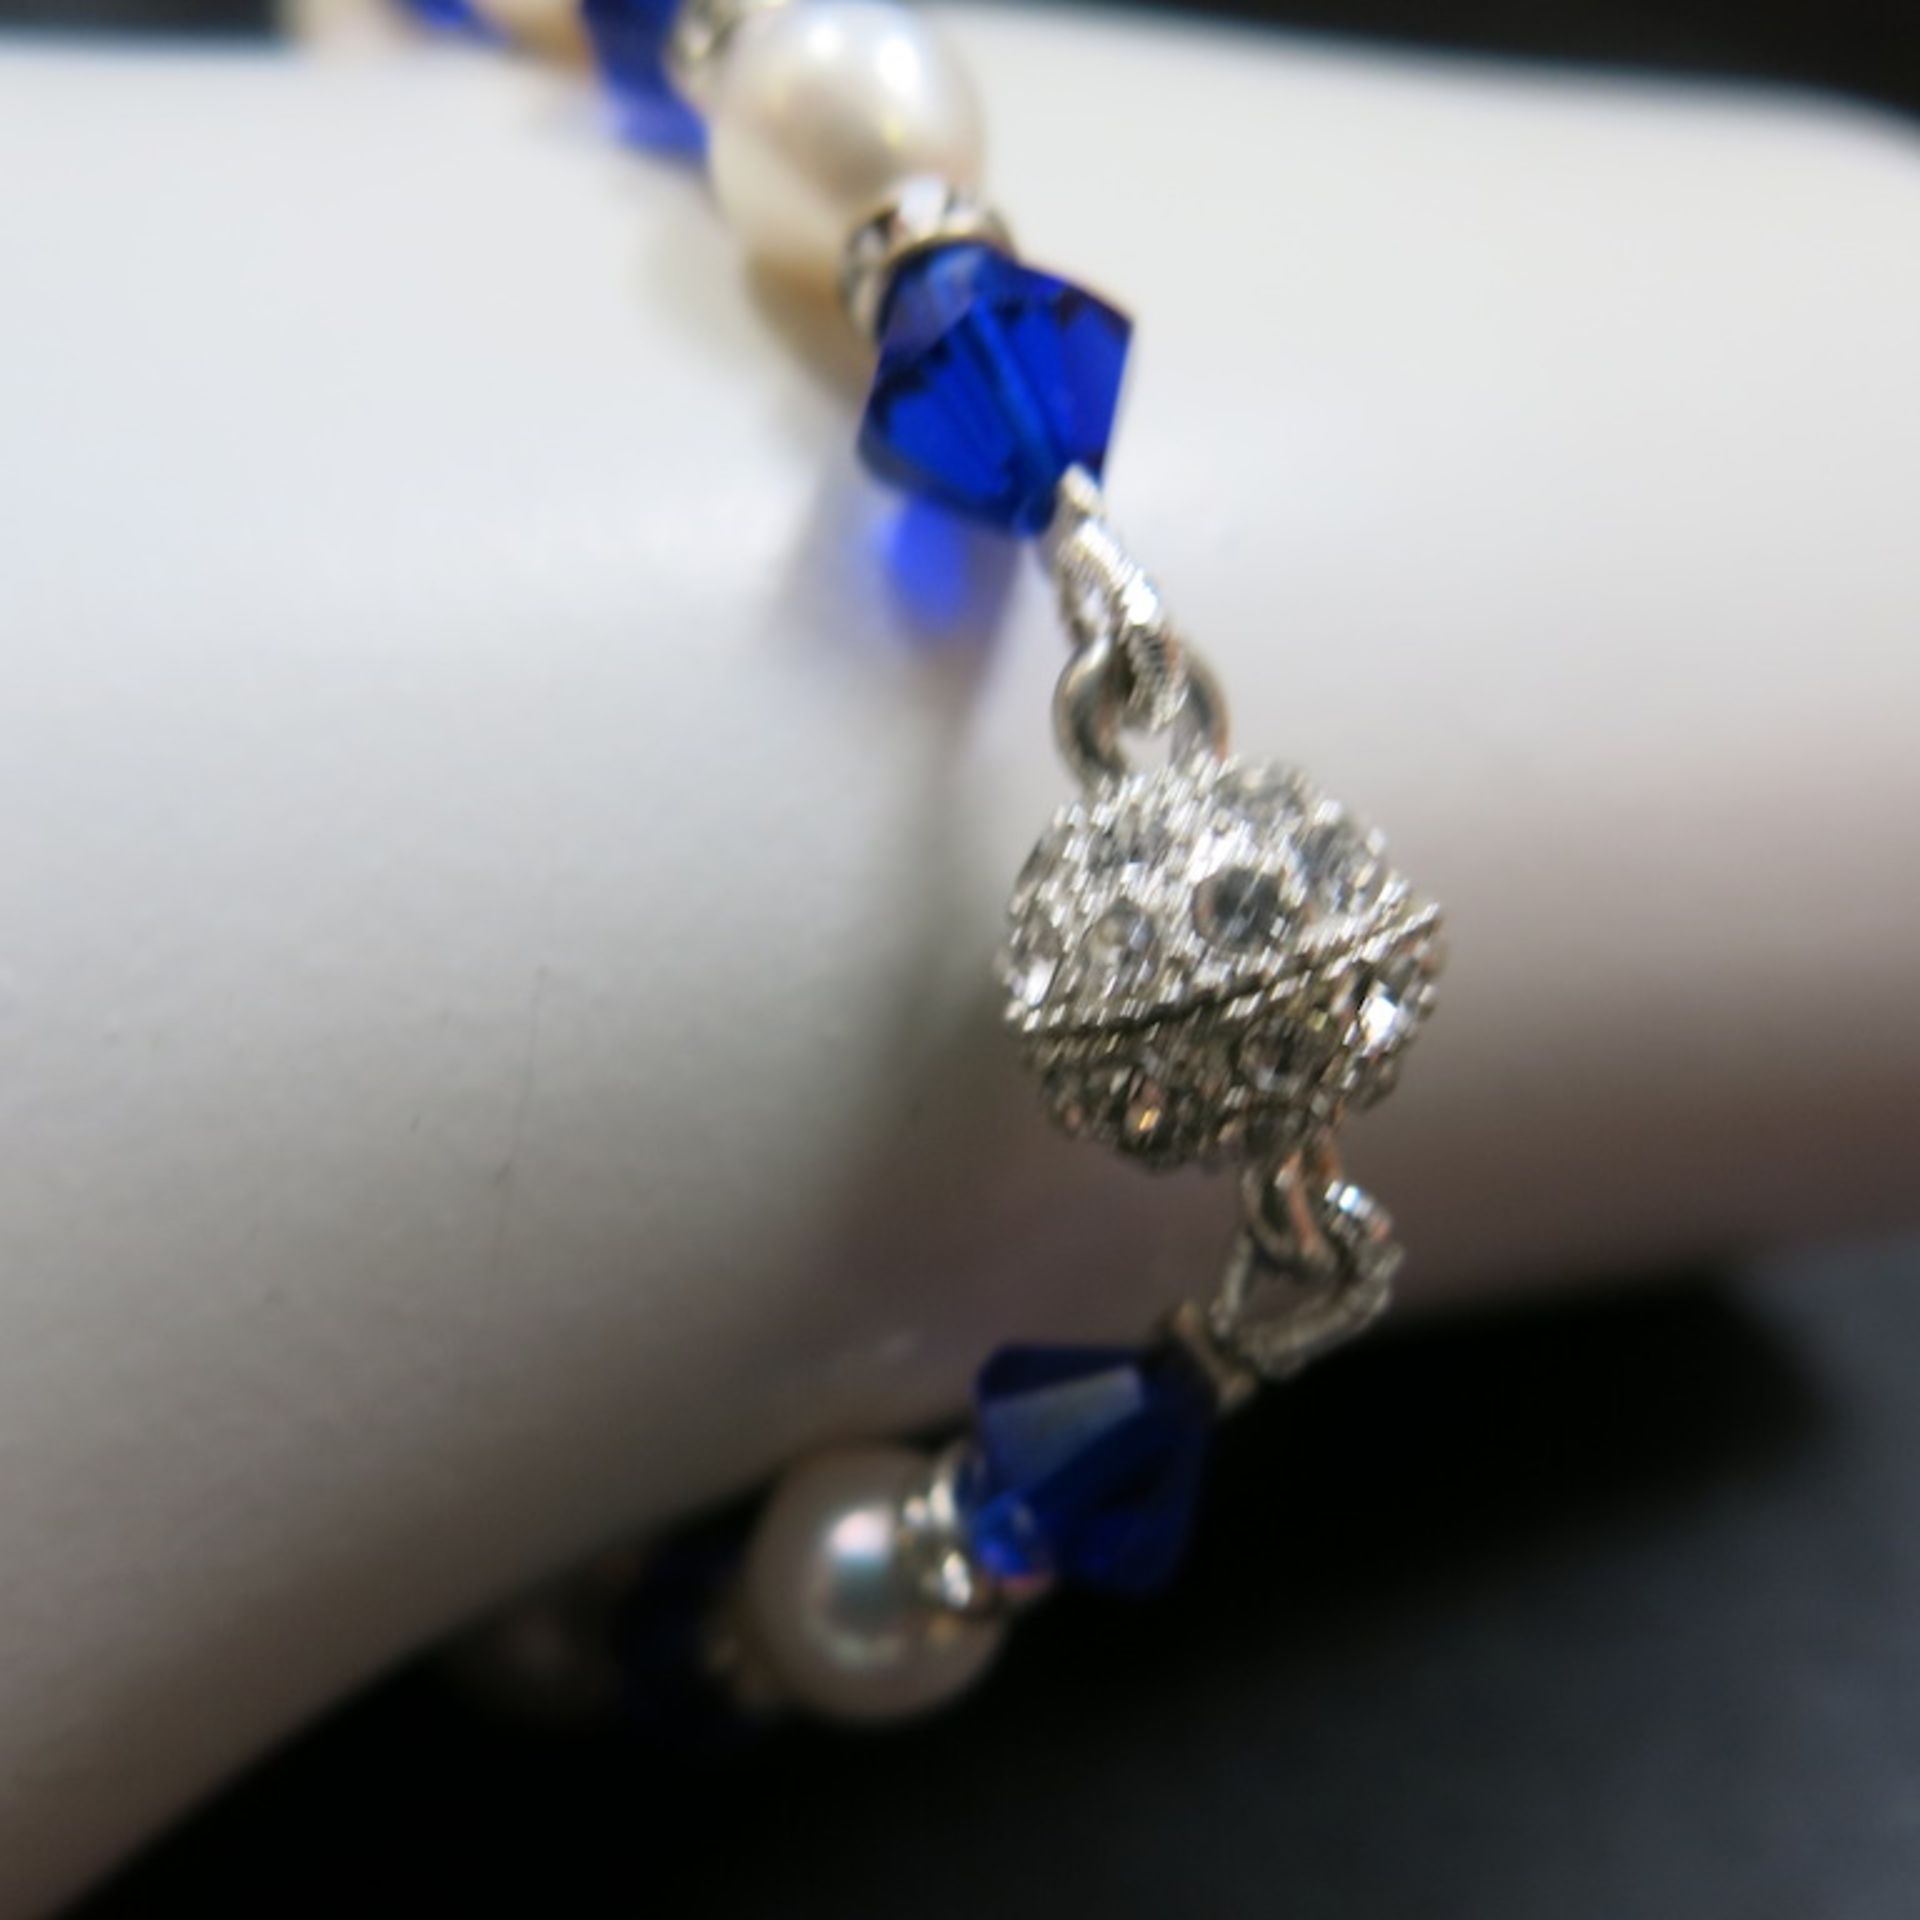 Pearl Bracelet (6.5mm) with Blue & Clear Stone Detail. Magnetic Clasp. RRP £58.00 - Image 2 of 3